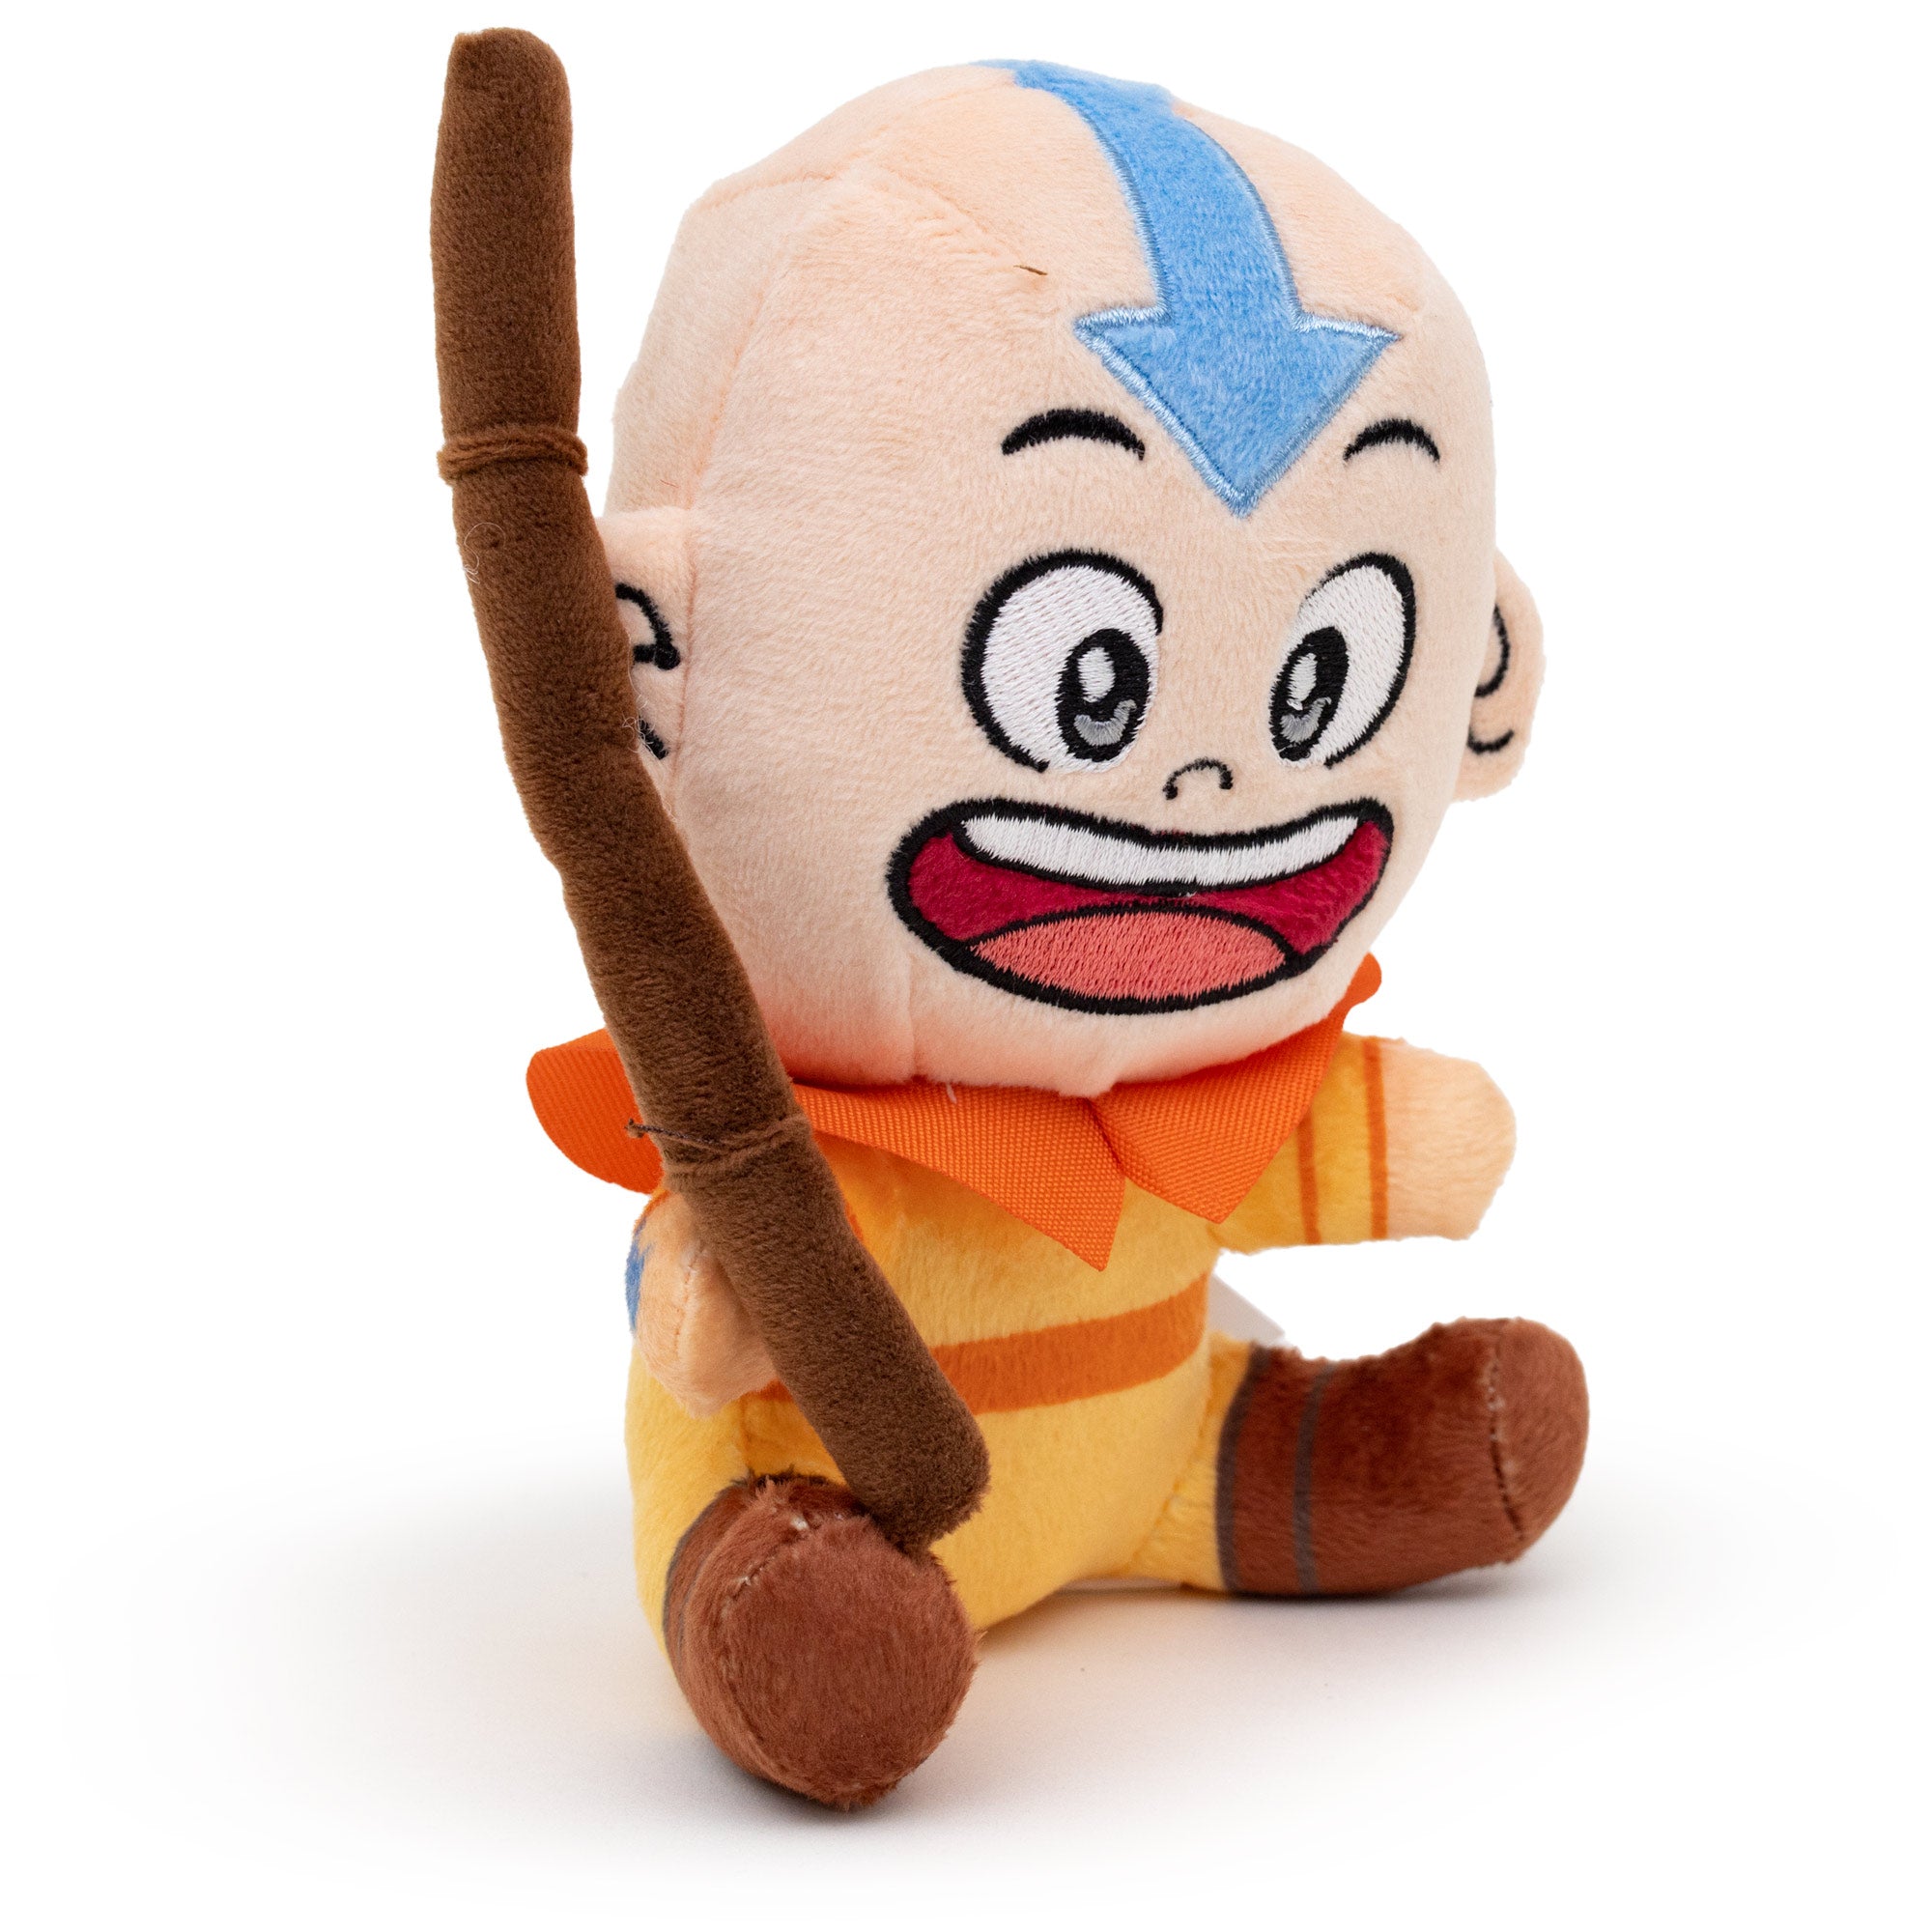 Avatar the Last Airbender Avatar Aang Sitting Squeaker Dog Toy